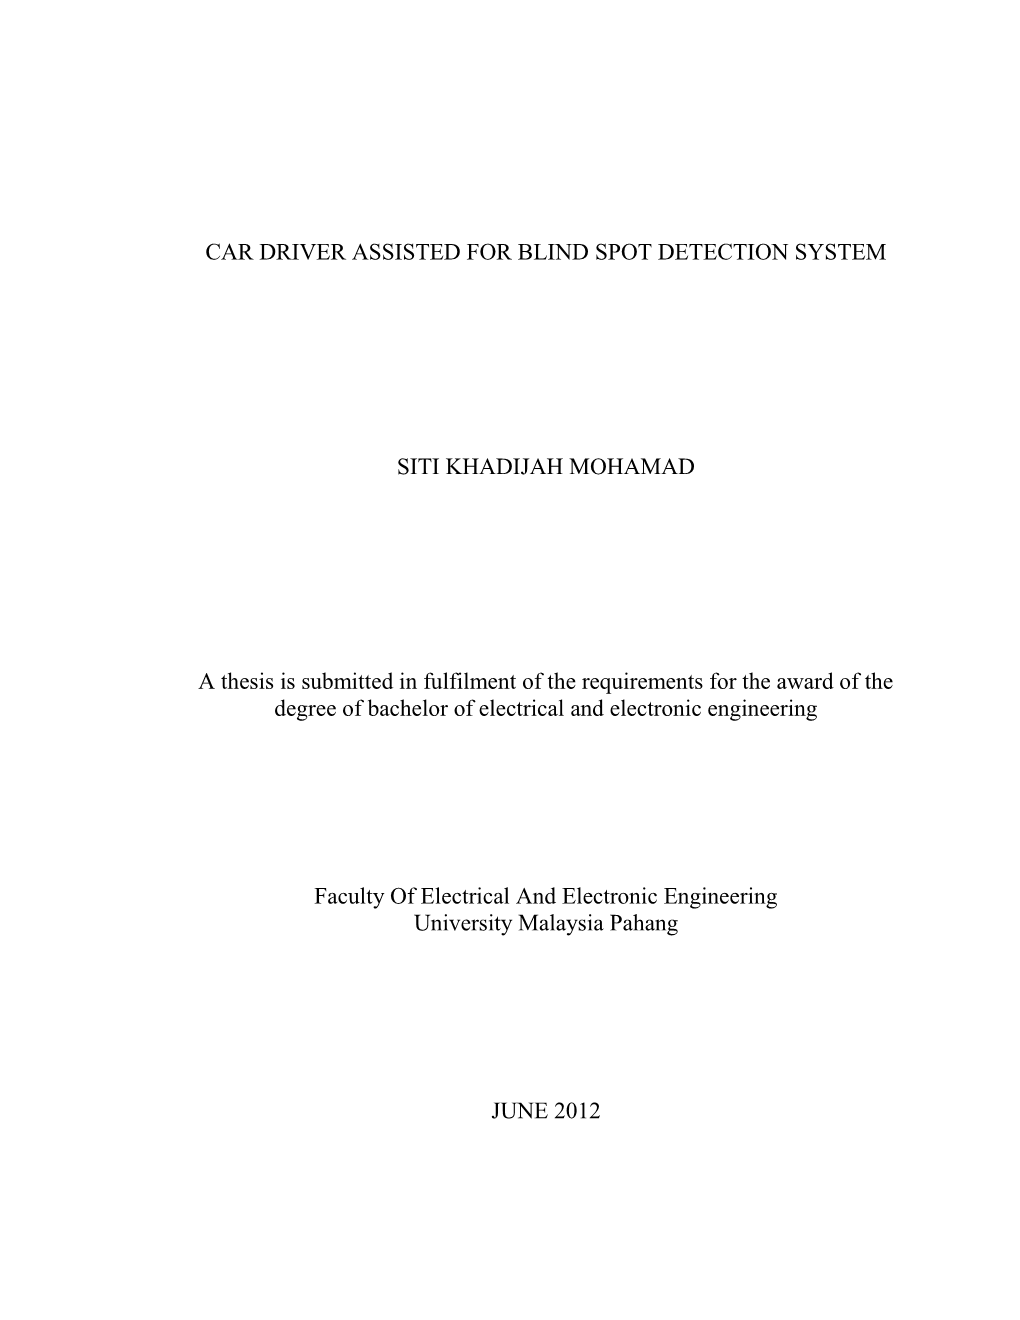 CAR DRIVER ASSISTED for BLIND SPOT DETECTION SYSTEM SITI KHADIJAH MOHAMAD a Thesis Is Submitted in Fulfilment of the Requirement